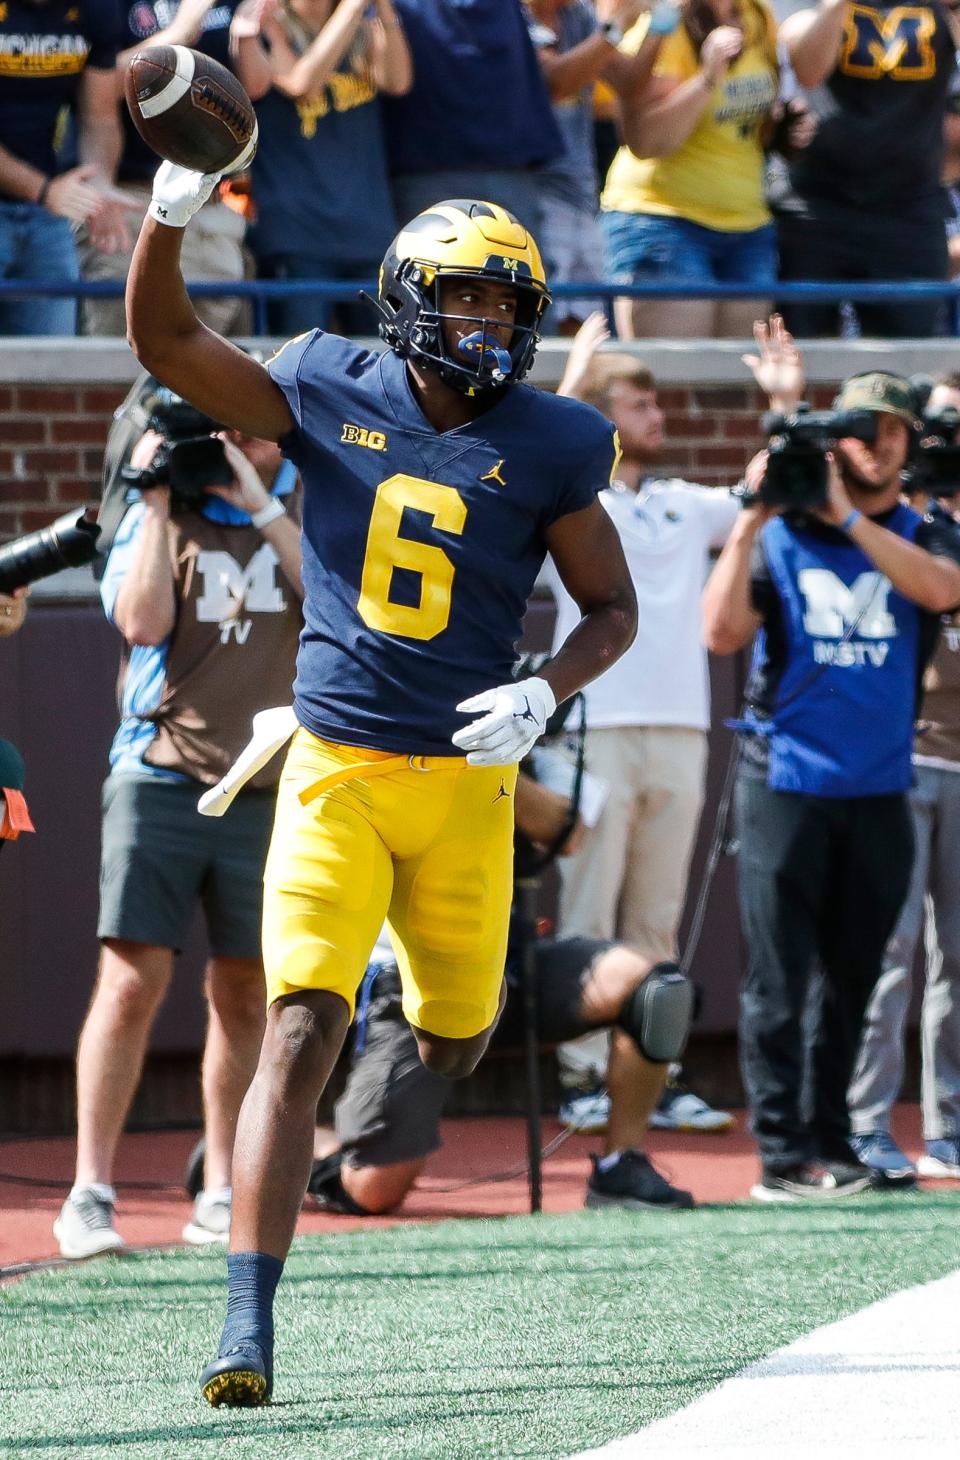 Michigan wide receiver Cornelius Johnson (6) scores a touchdown against Northern Illinois during the first half at Michigan Stadium in Ann Arbor on Saturday, Sept. 18, 2021.